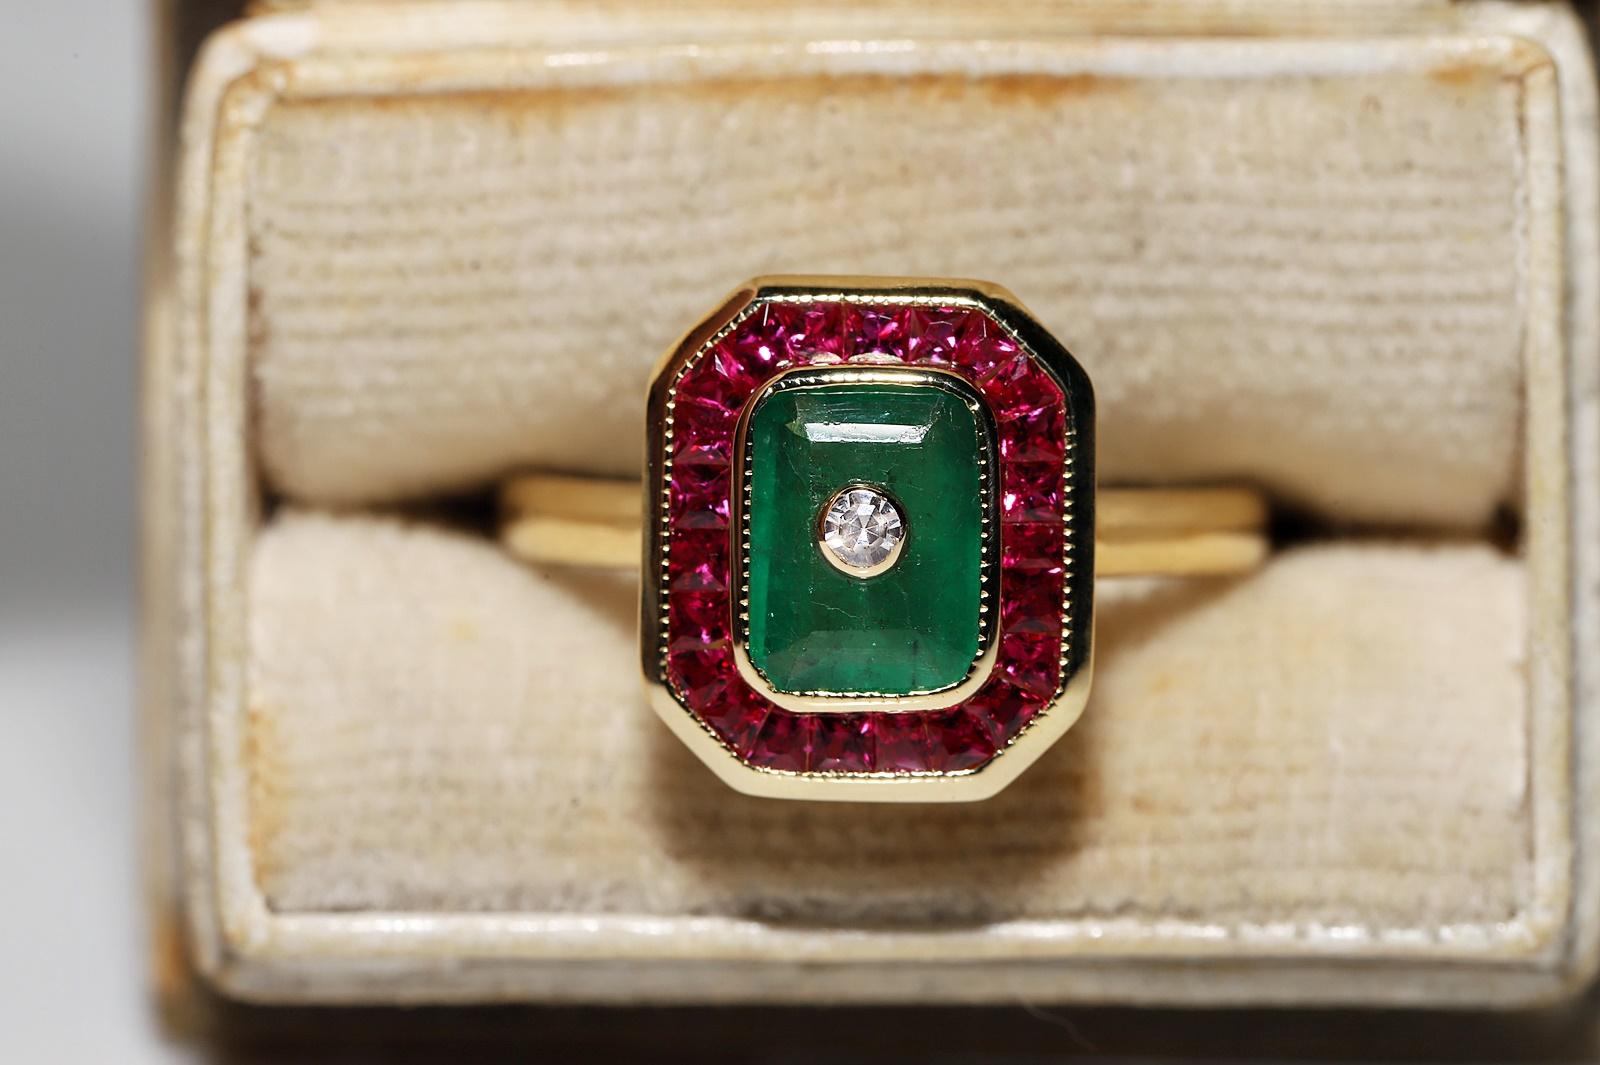 In very good condition. 
Total weight is 4.8 grams.
Totally is diamond 0.03 ct.
The diamond is has H vvs clarity.
Totally is emerald 1.05 ct.
Totally is side caliber ruby 0.77 ct.
Ring size is US 6.5 
We can make any size.
Box is not